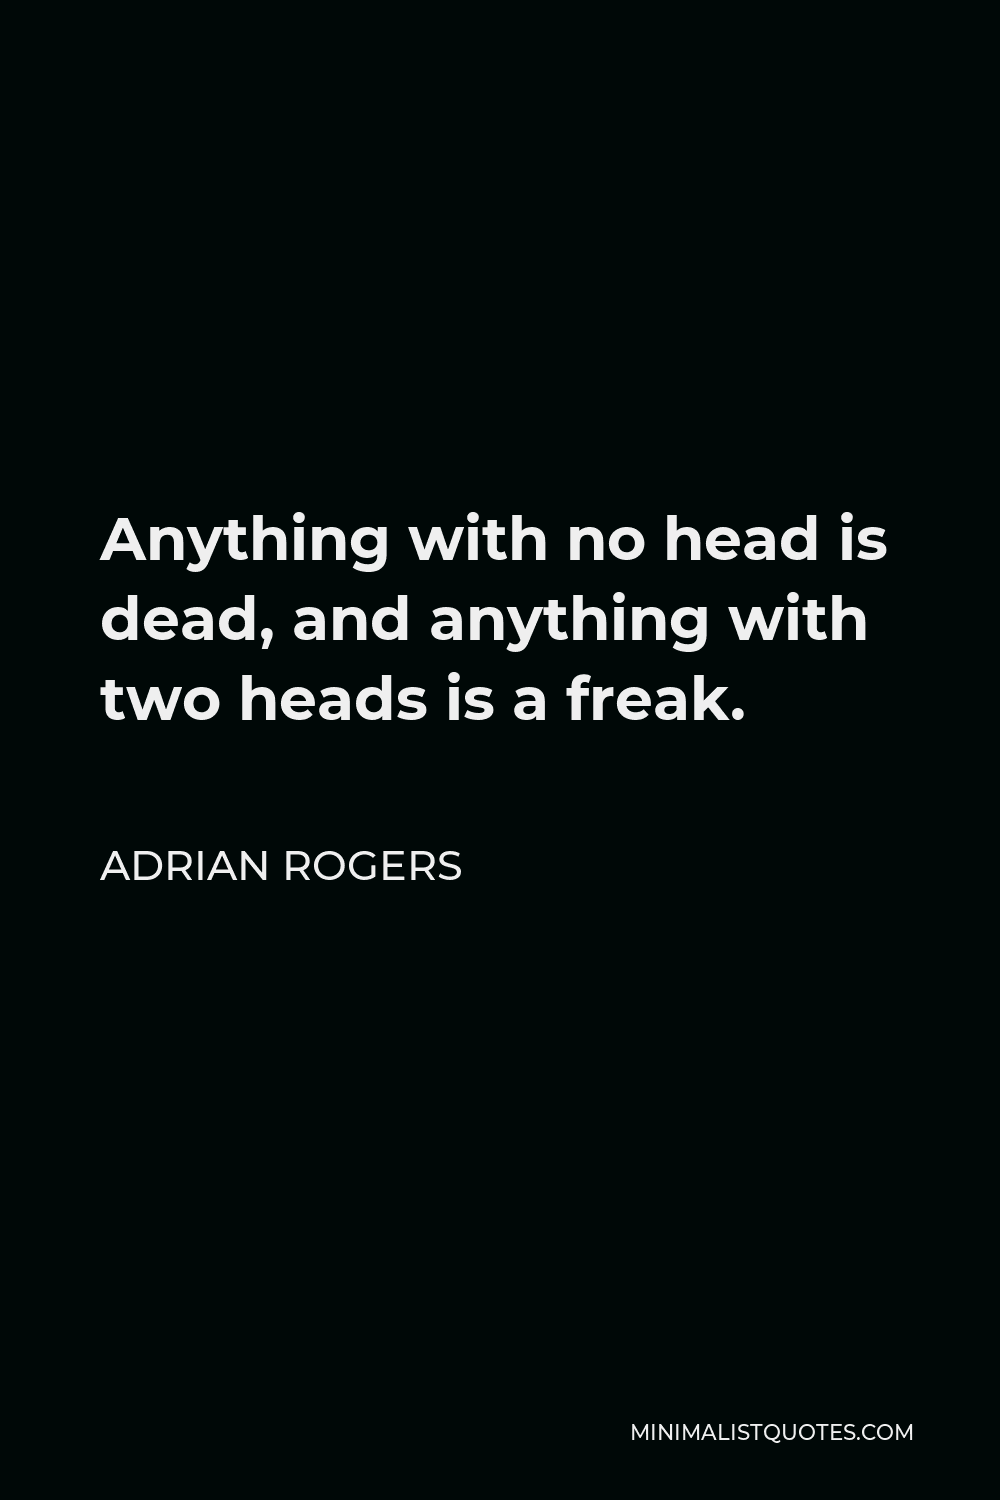 Adrian Rogers Quote - Anything with no head is dead, and anything with two heads is a freak.